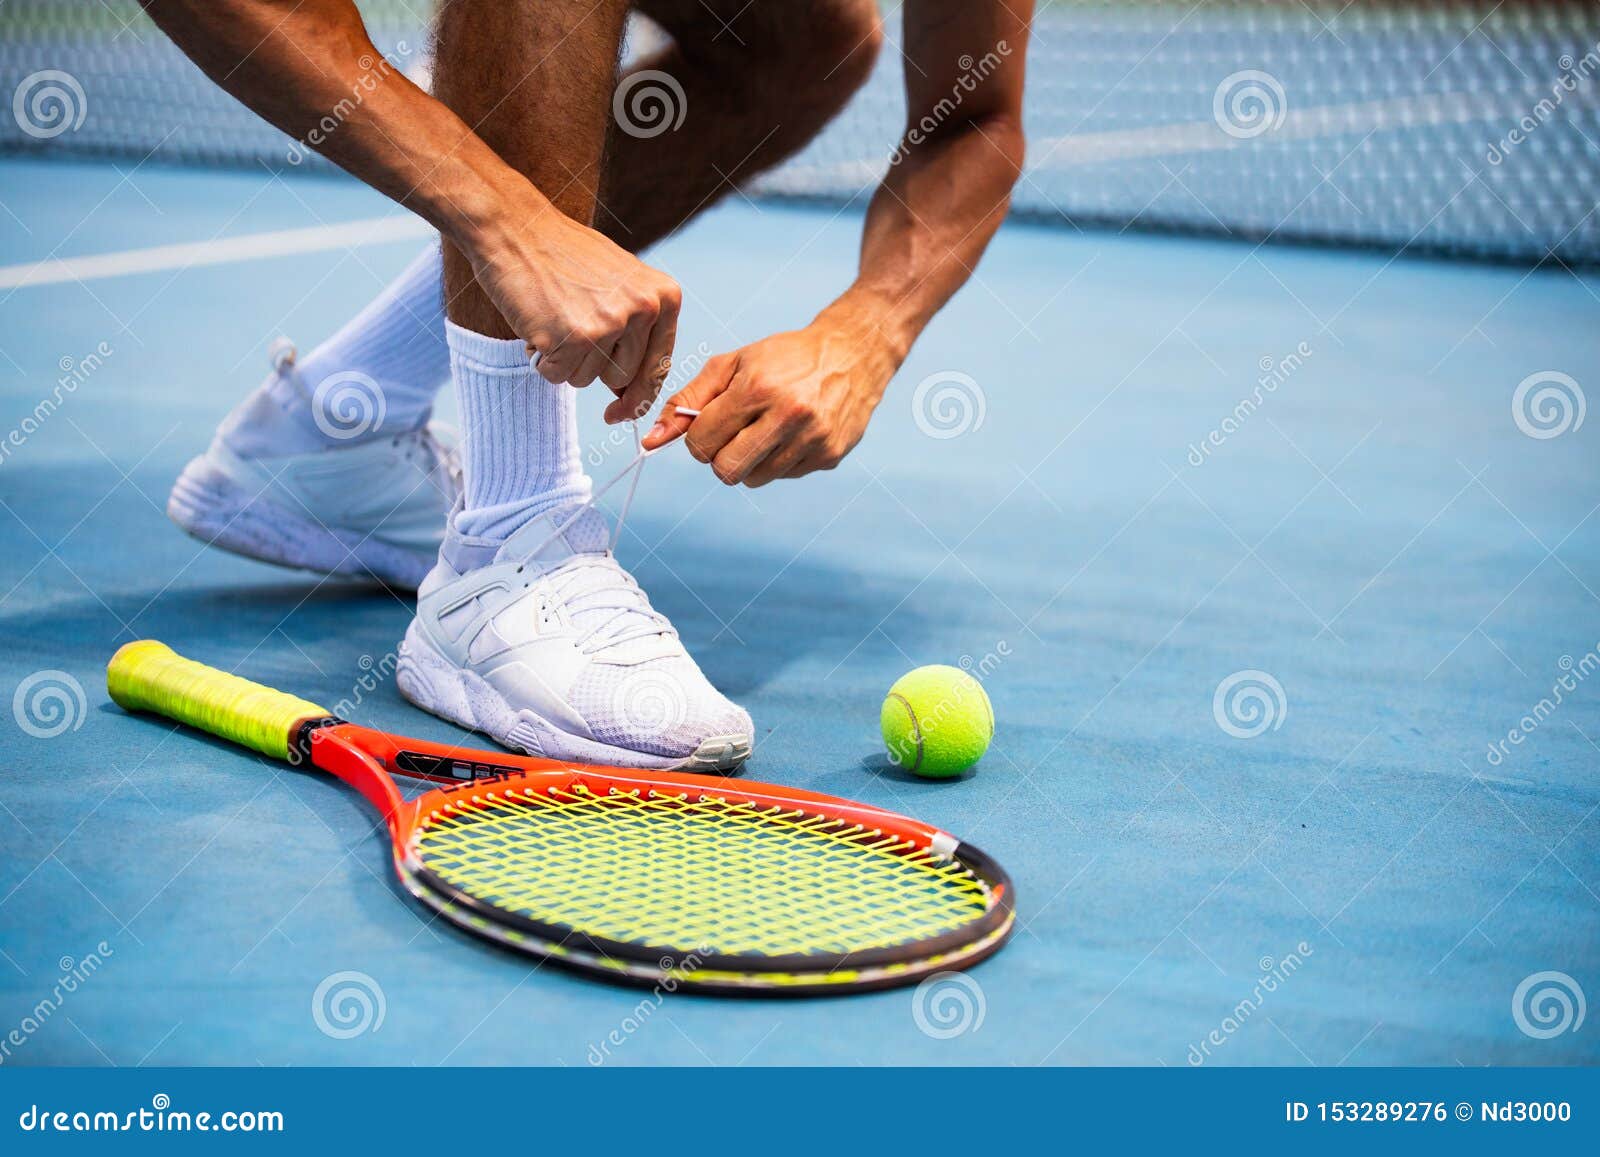 Tennis Athlete Player Getting Ready Tying Shoe Laces during Game on ...